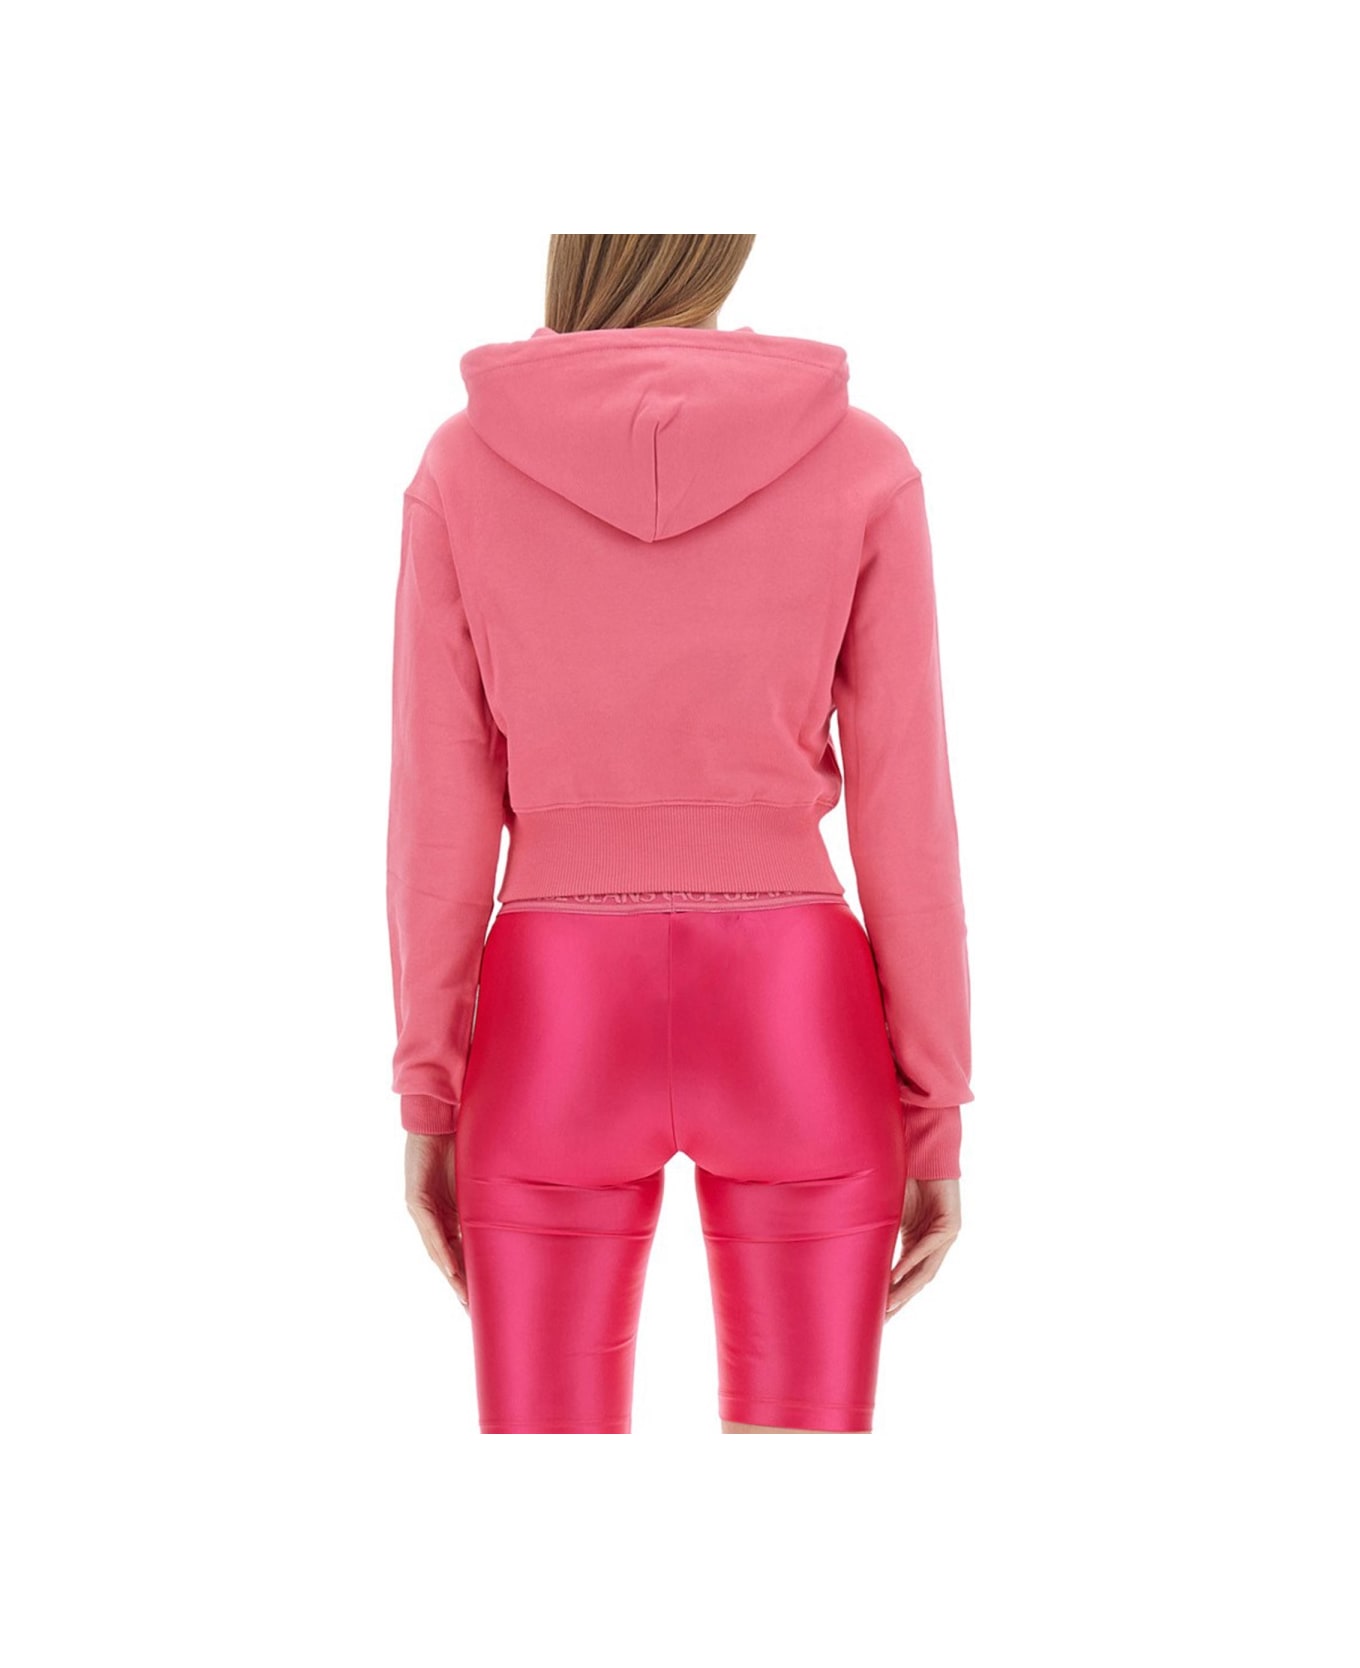 Versace Jeans Couture Cropped Sweatshirt - FUCHSIA